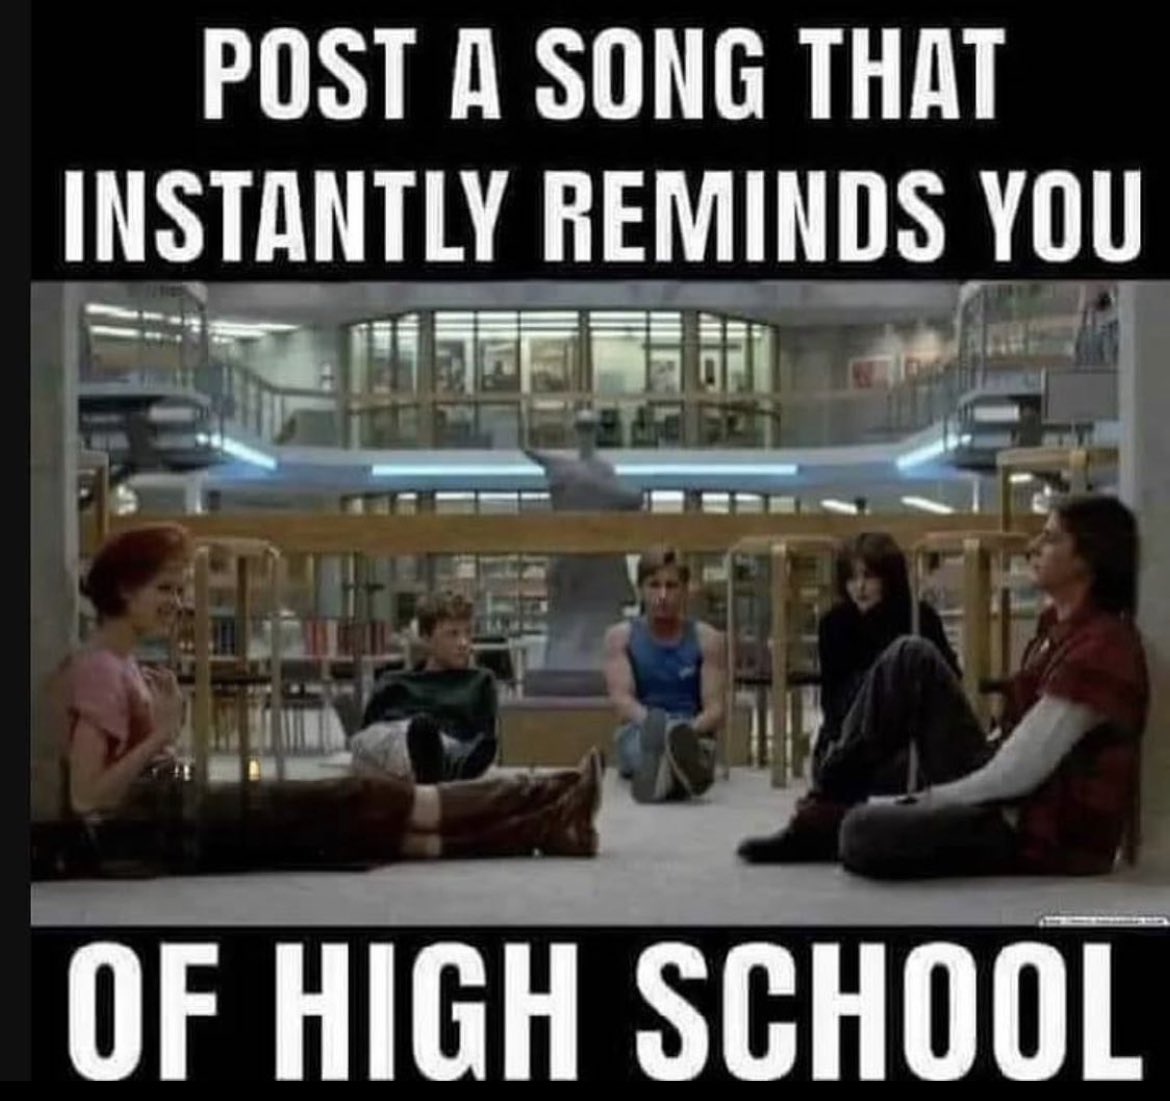 💥QOTD💥
What is a song that reminds you of high school?! 
(Mine is in the thread) 
#QOTD #Thursday #thursdaymorning #MusicThursday #ThrowbackThursday